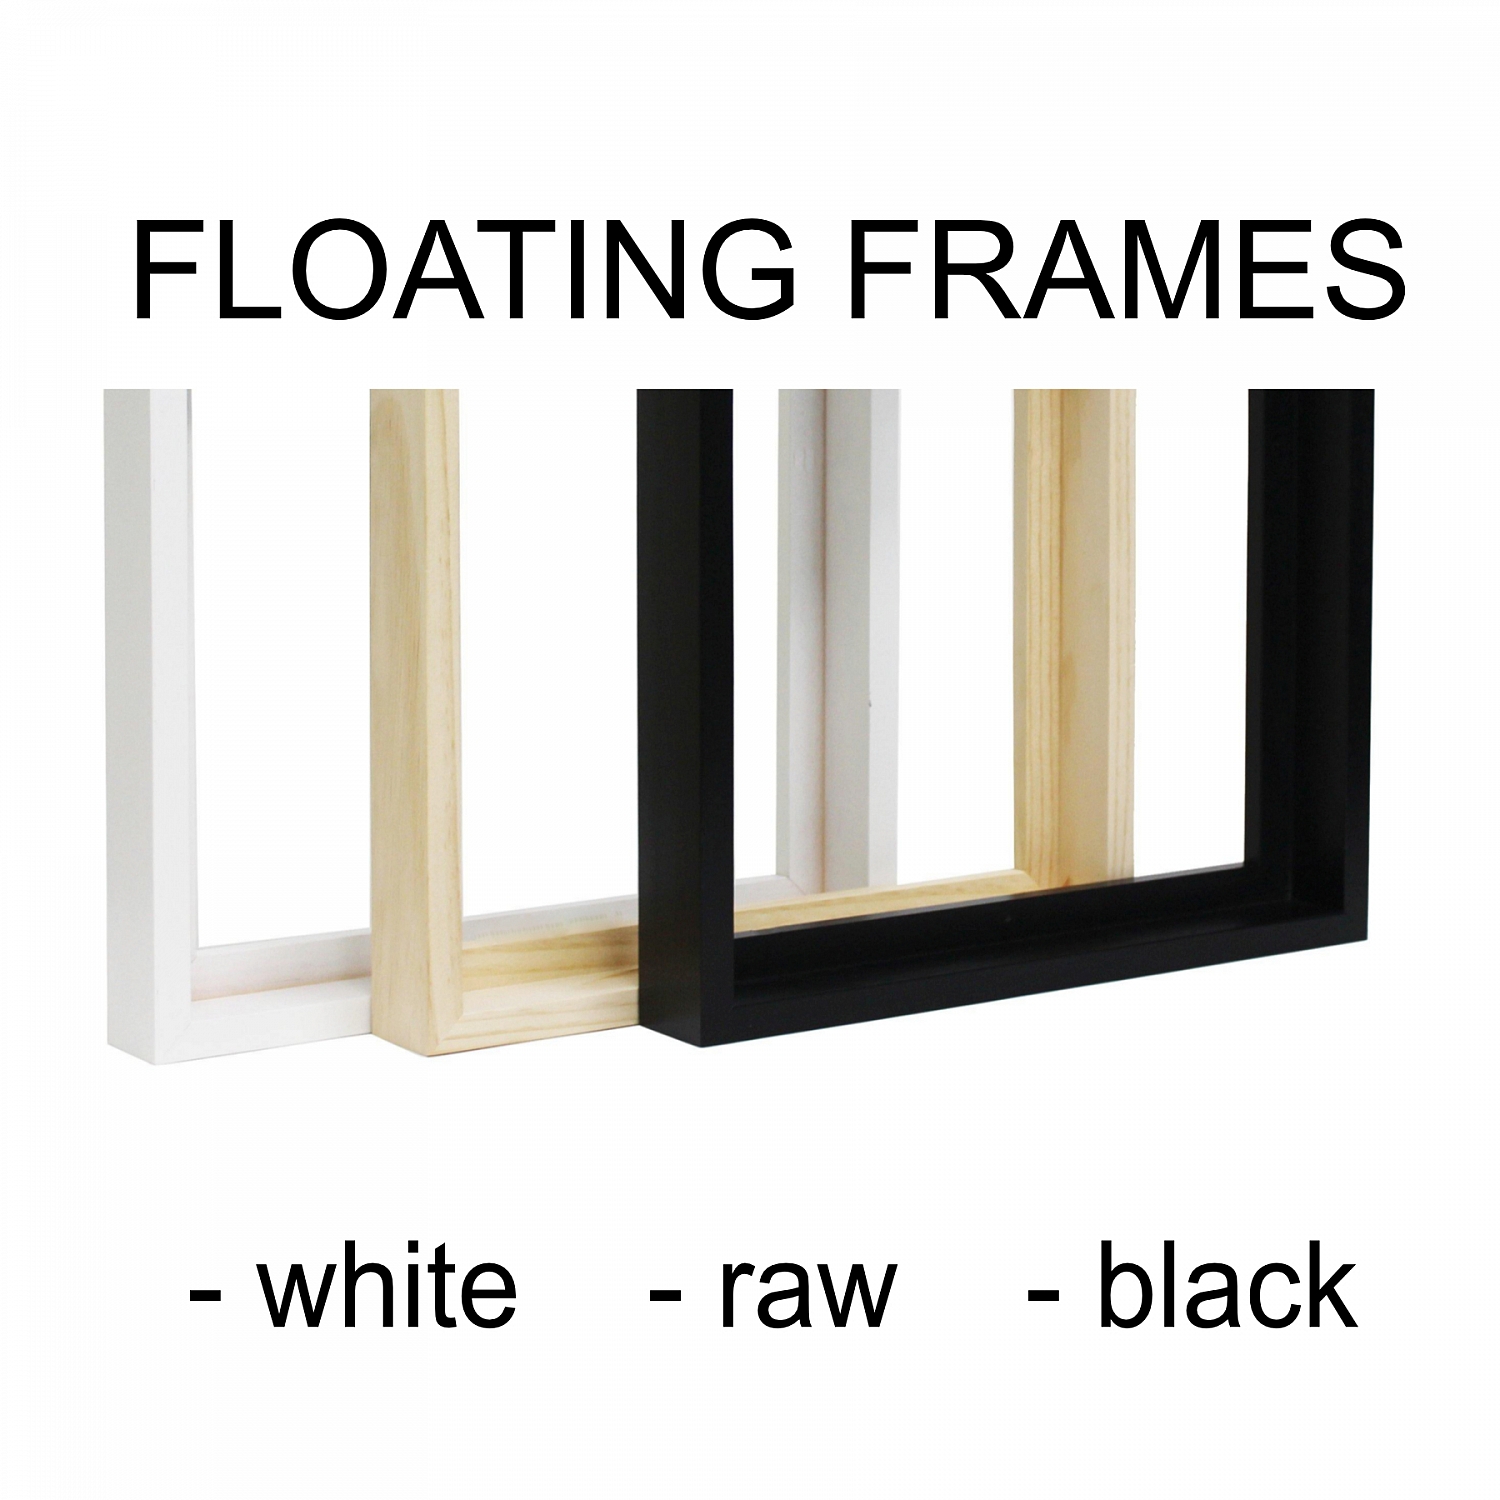  FLOATING FRAME (SHADOW BOX) - Panoramic Canvas Prints - YOUR OWN CUSTOM IMAGE | Floating_frames.jpg